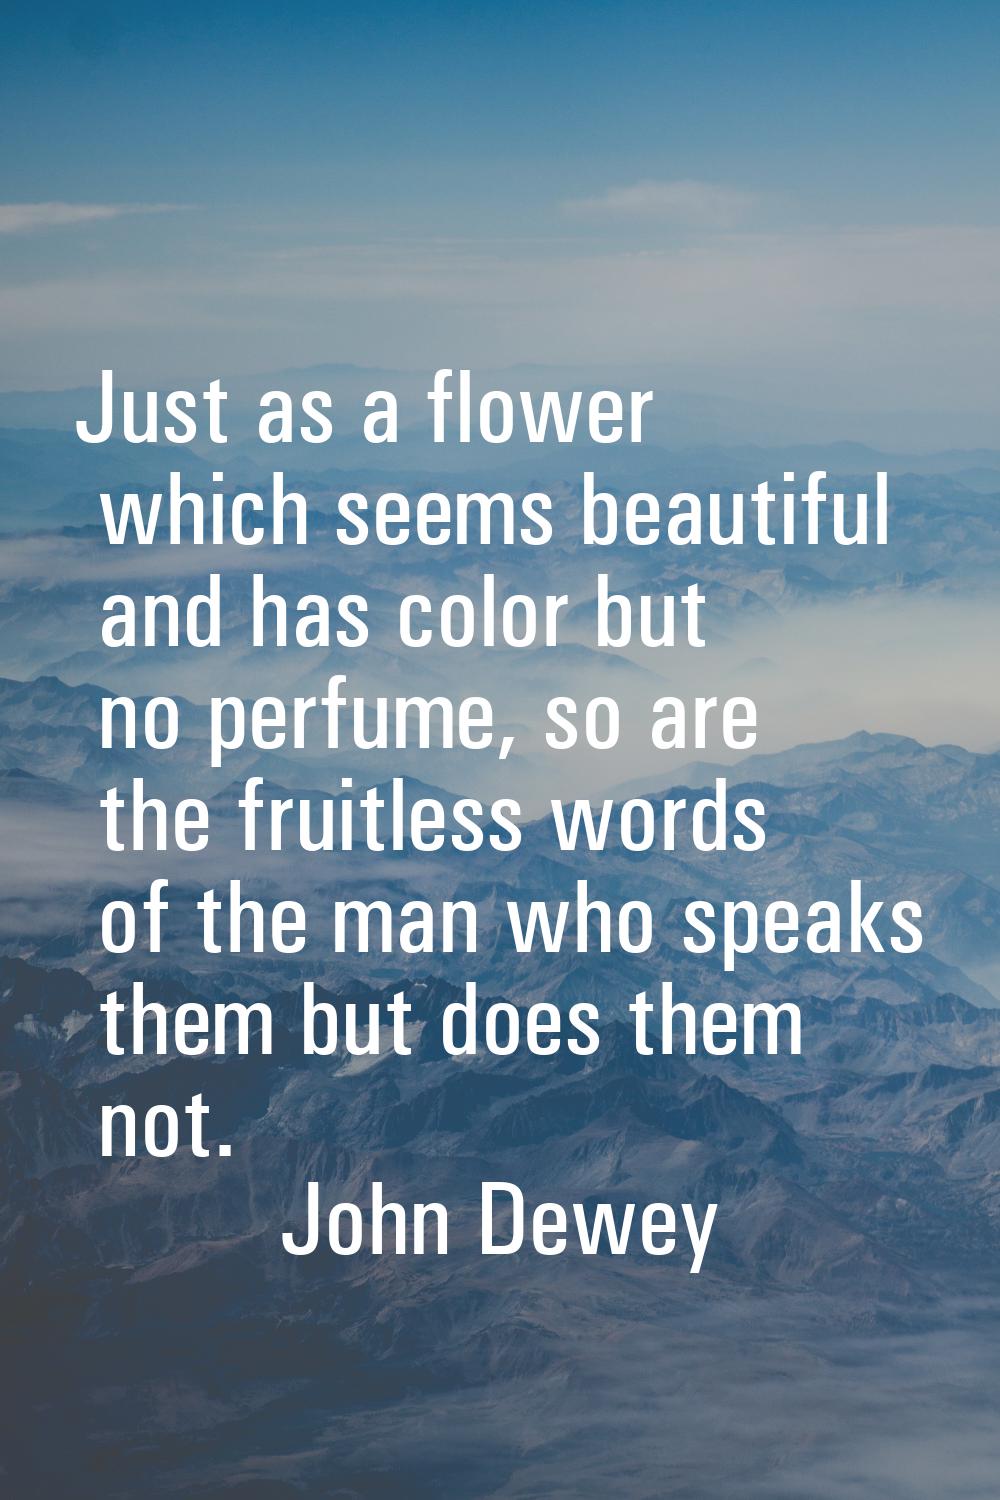 Just as a flower which seems beautiful and has color but no perfume, so are the fruitless words of 